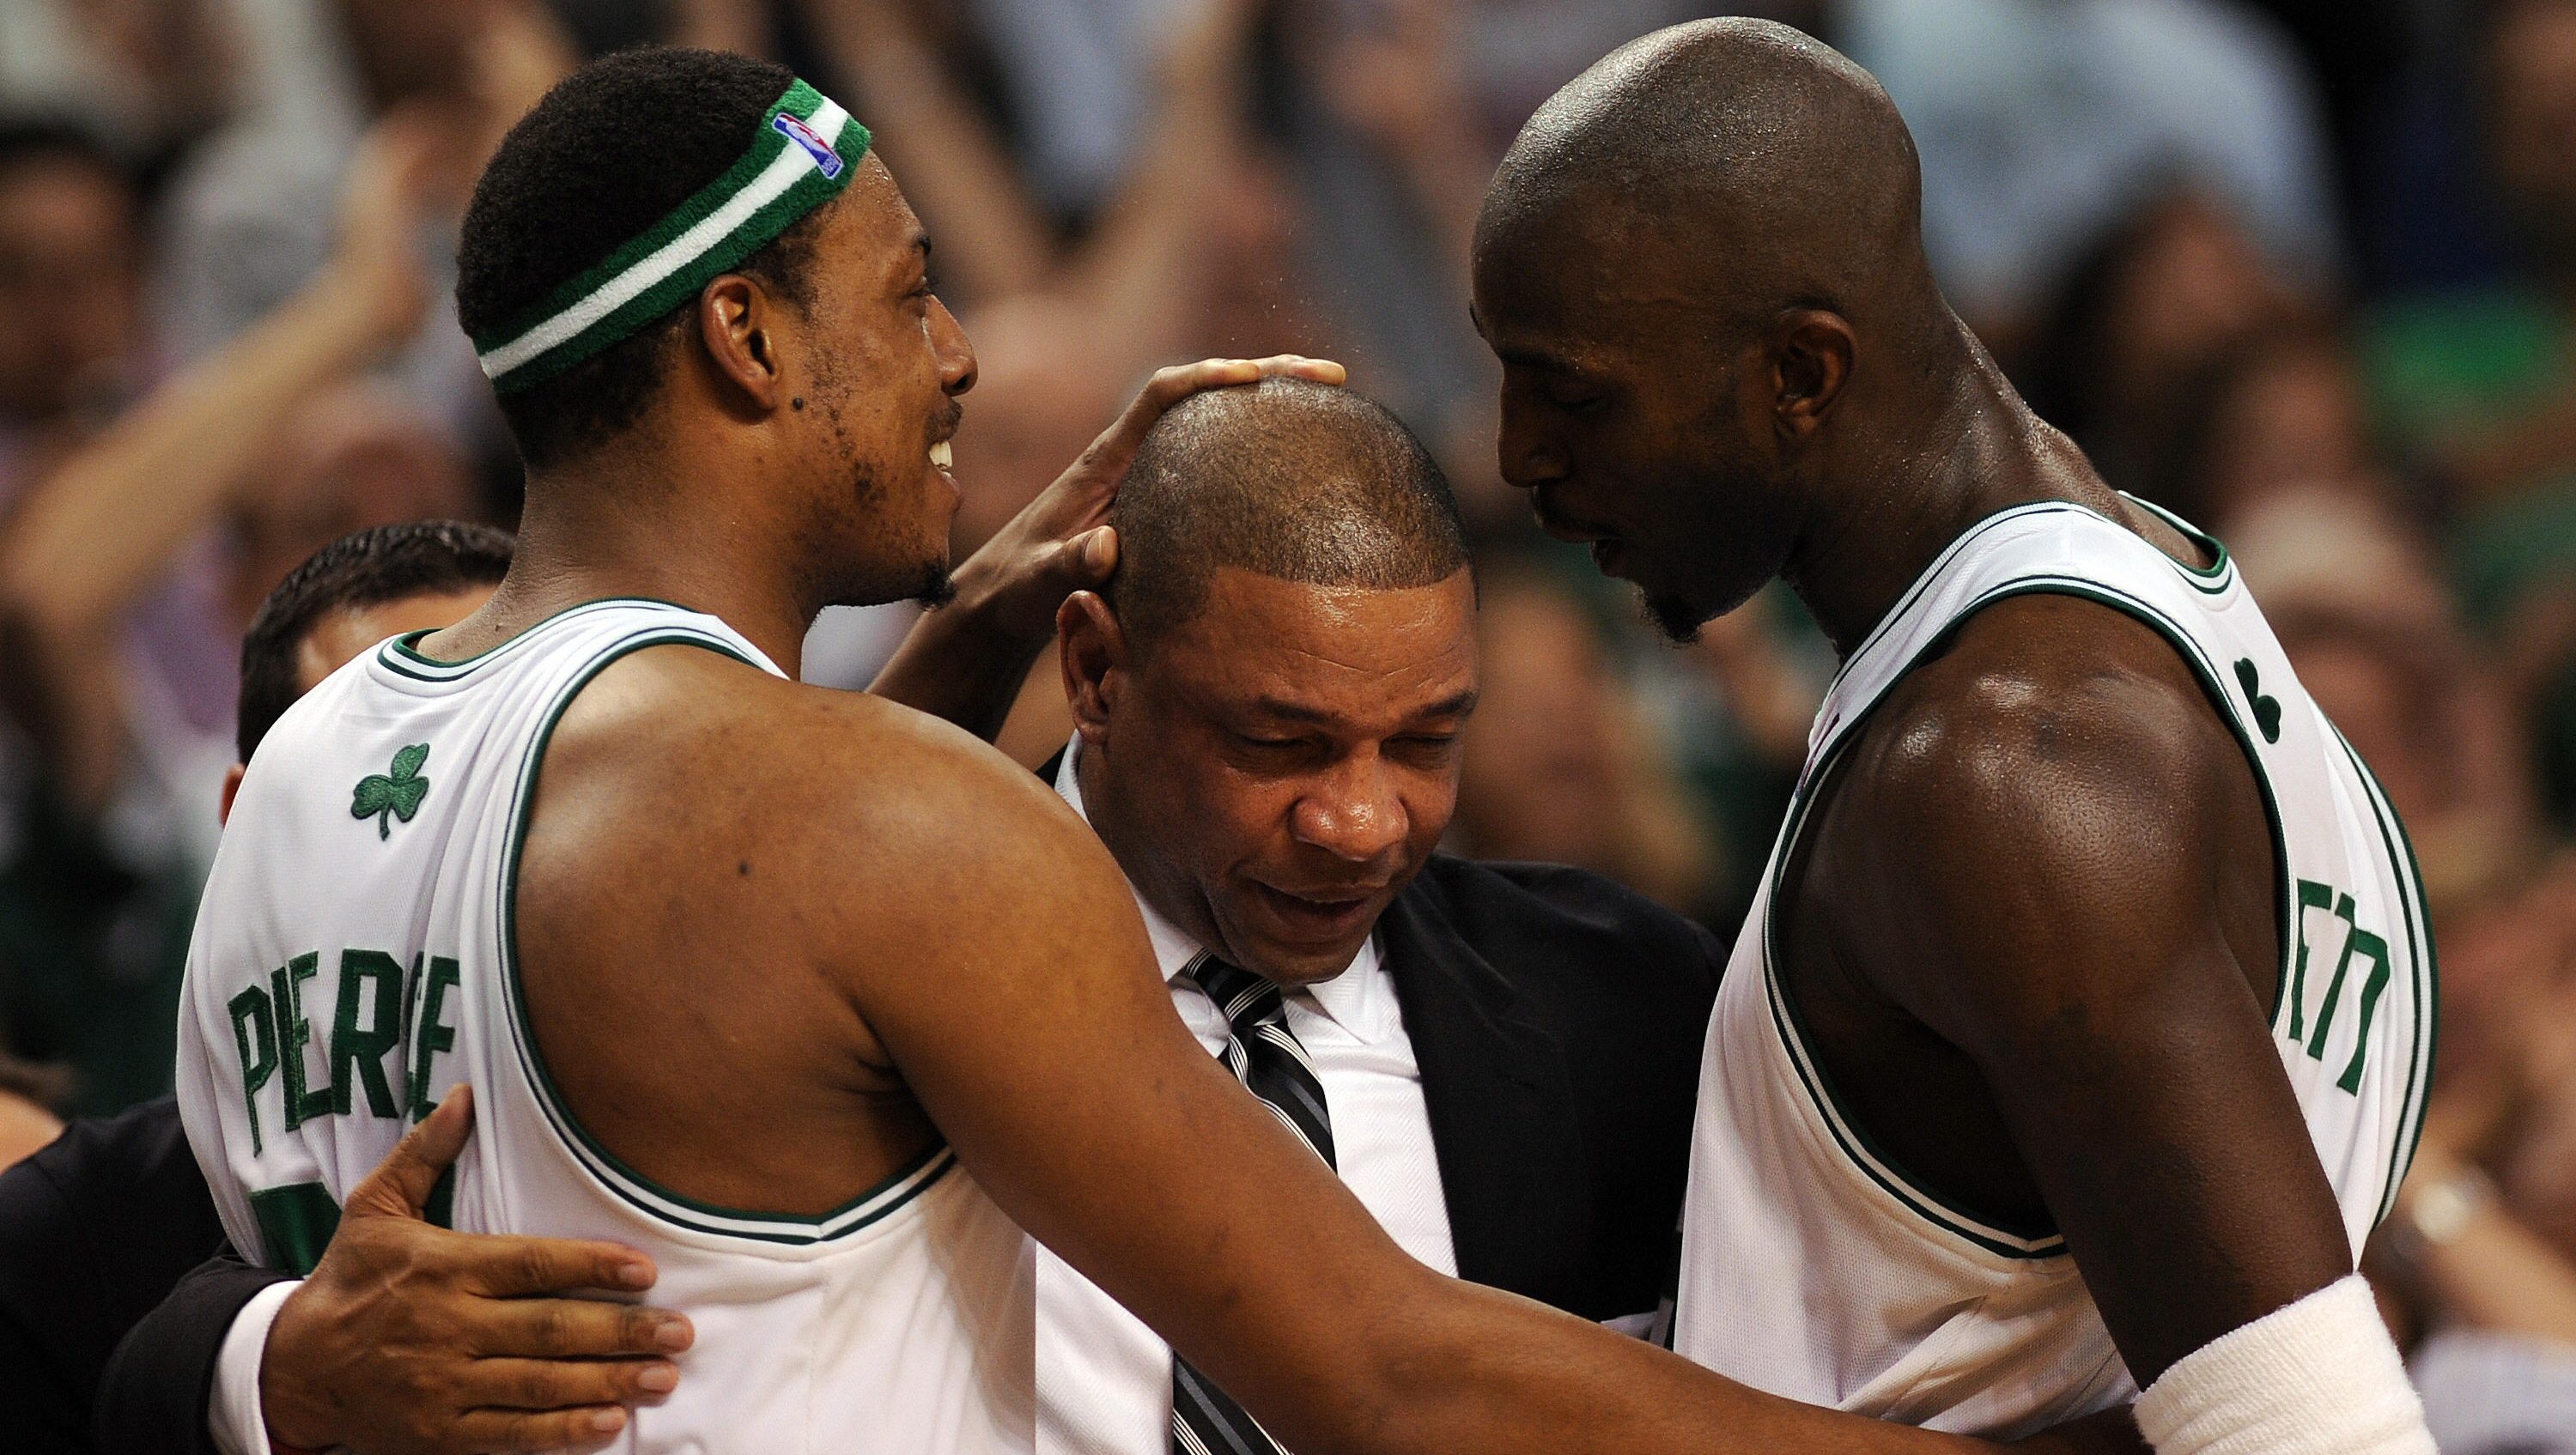 Boston Celtics News: Yes, There Were Boos at Kevin Garnett's